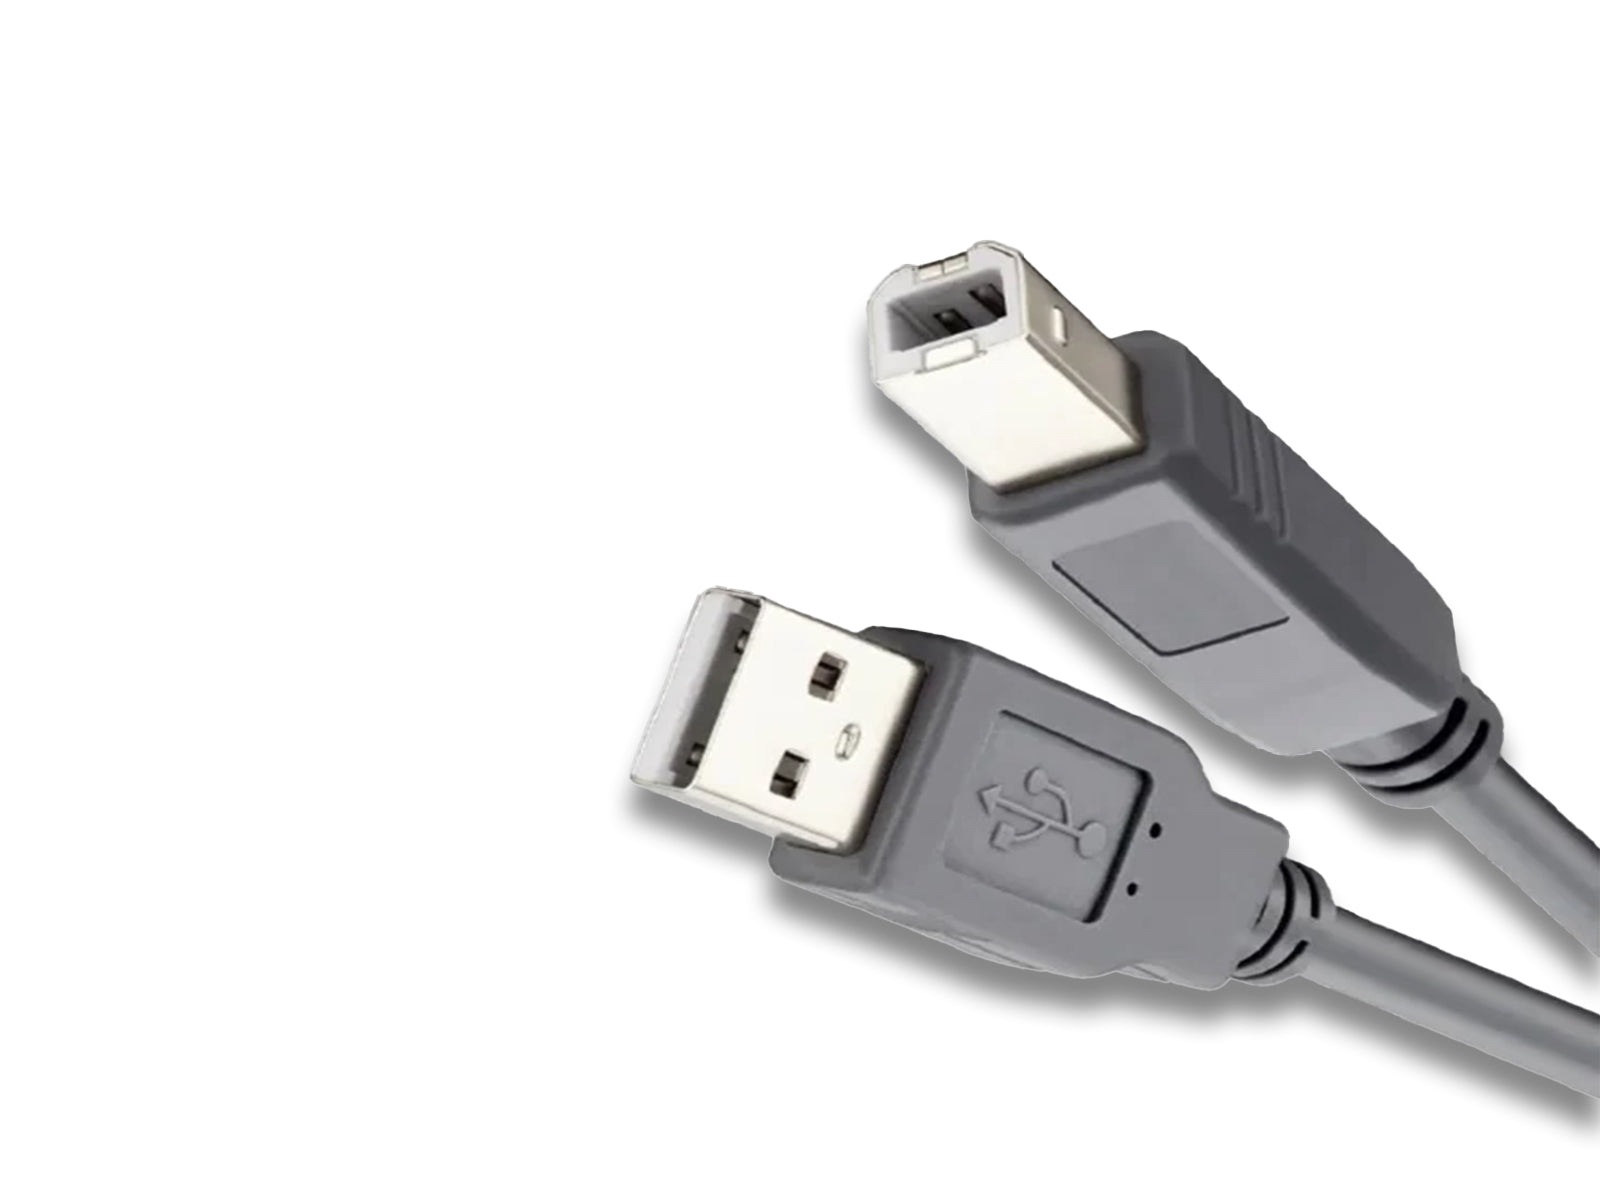 Printer Cable with USB Type A & Male USB Type B